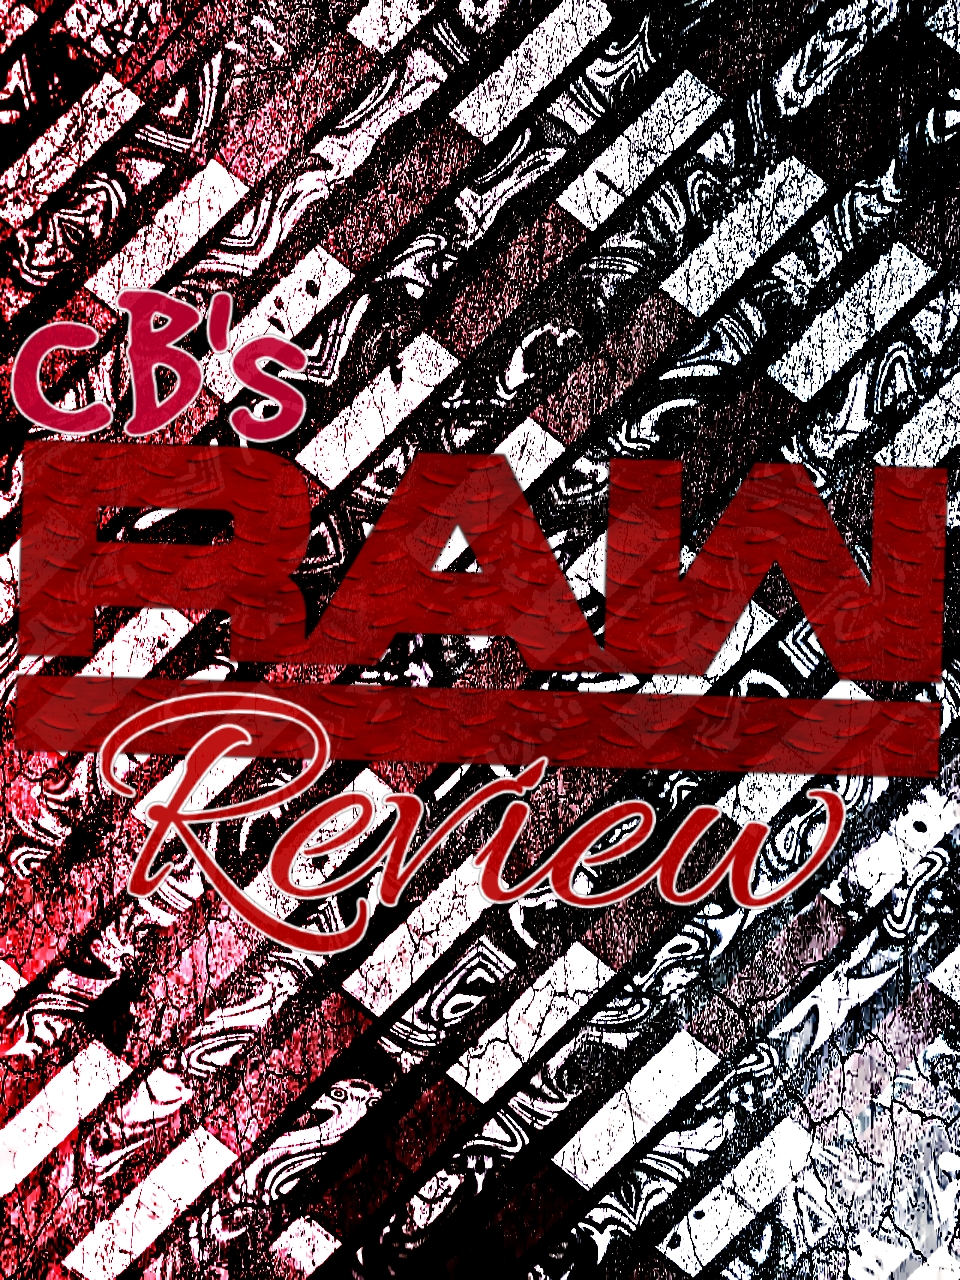 WWE RAW REVIEW 03/06/2019 – The Pro Wrestling Journal